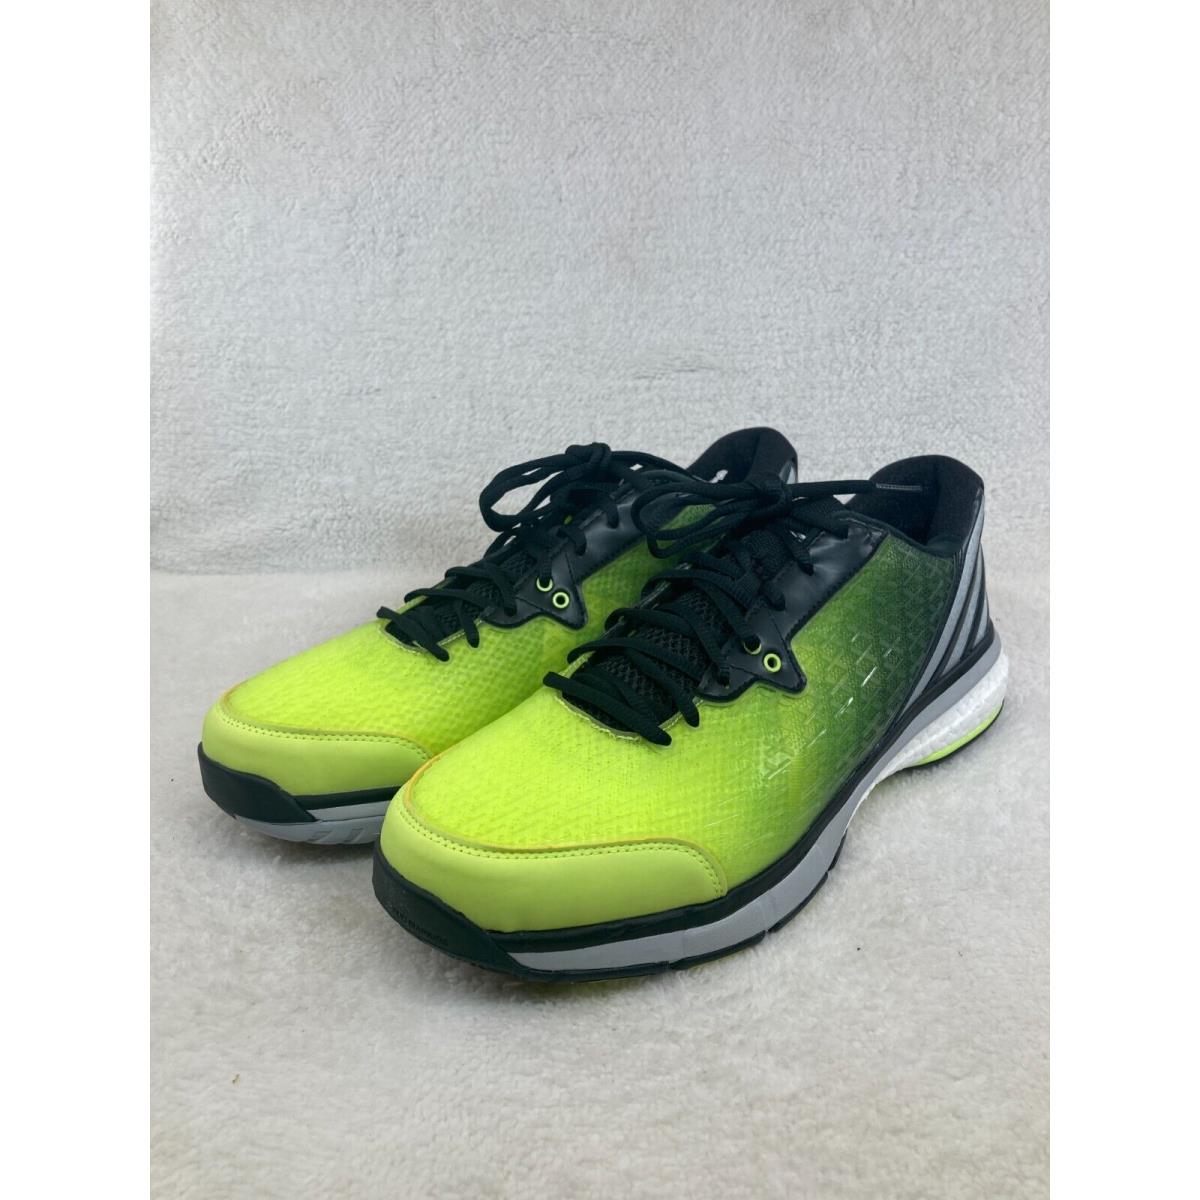 Rust To interact easy to handle Adidas Energy Volley Boost 2.0 Men`s Size 13 Shoe Volleyball Yellow Black |  888596458371 - Adidas shoes Energy Volley - Black | SporTipTop